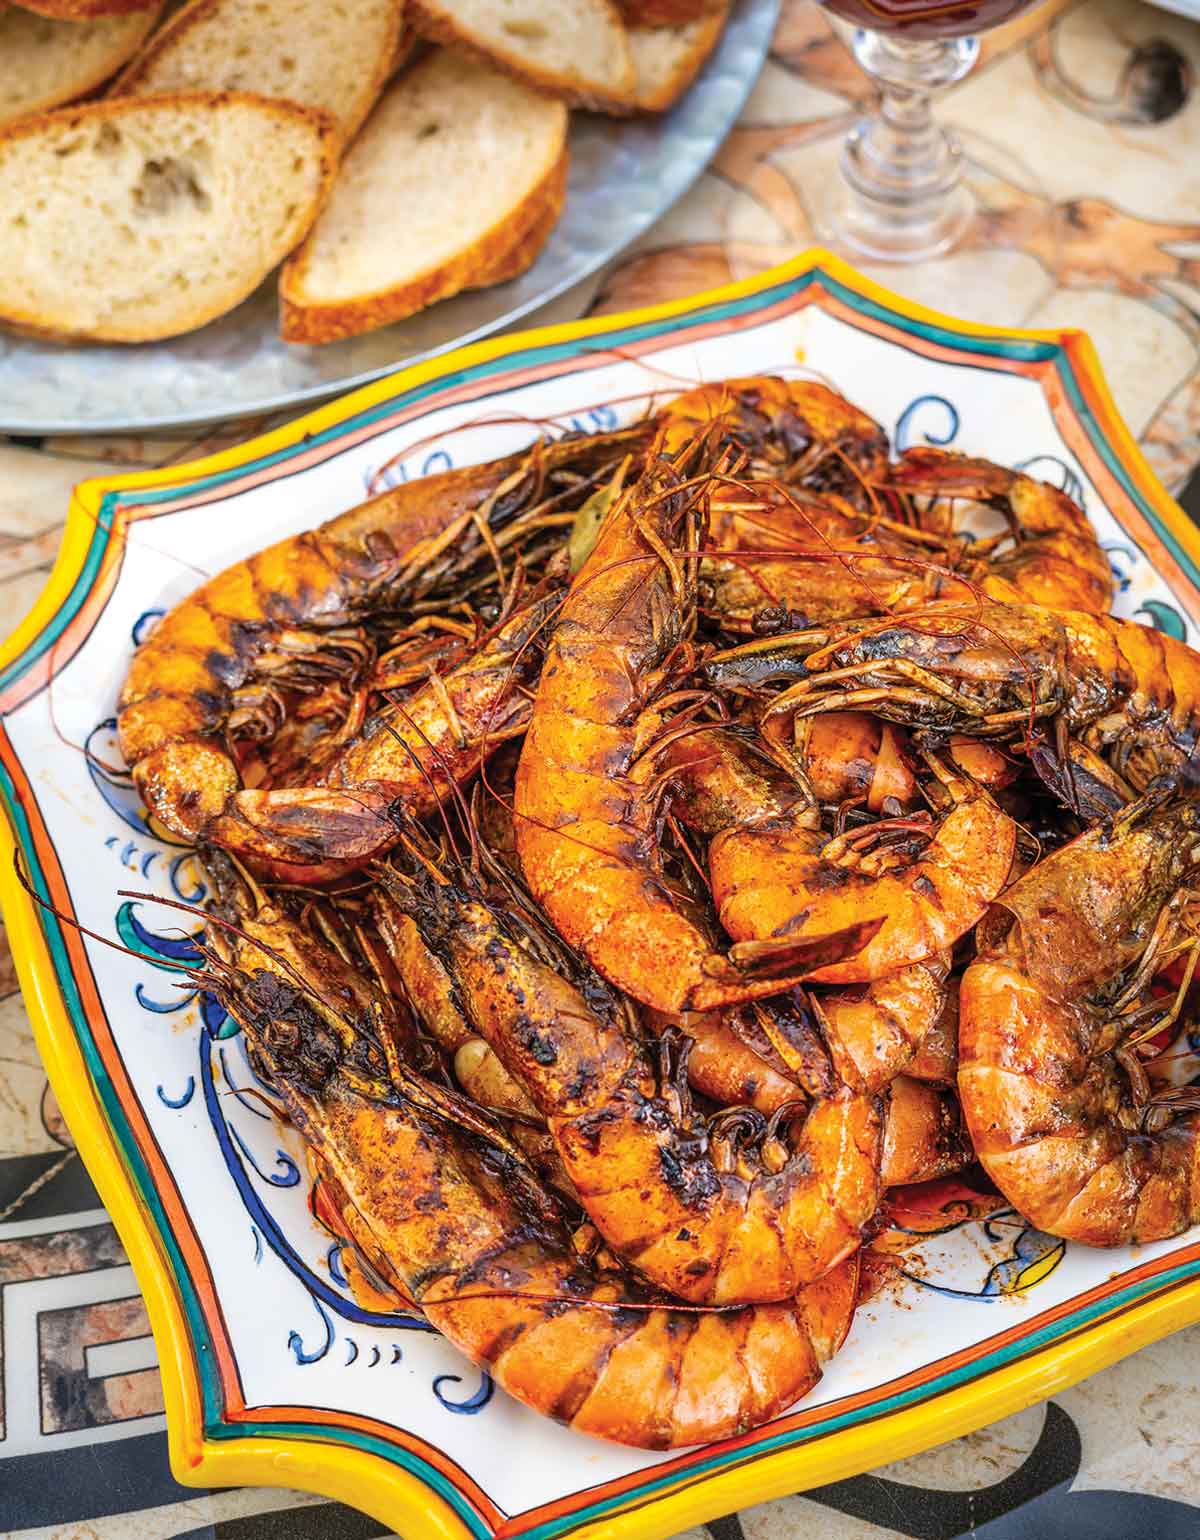 A platter of baked shrimp with toasted bread in the background.